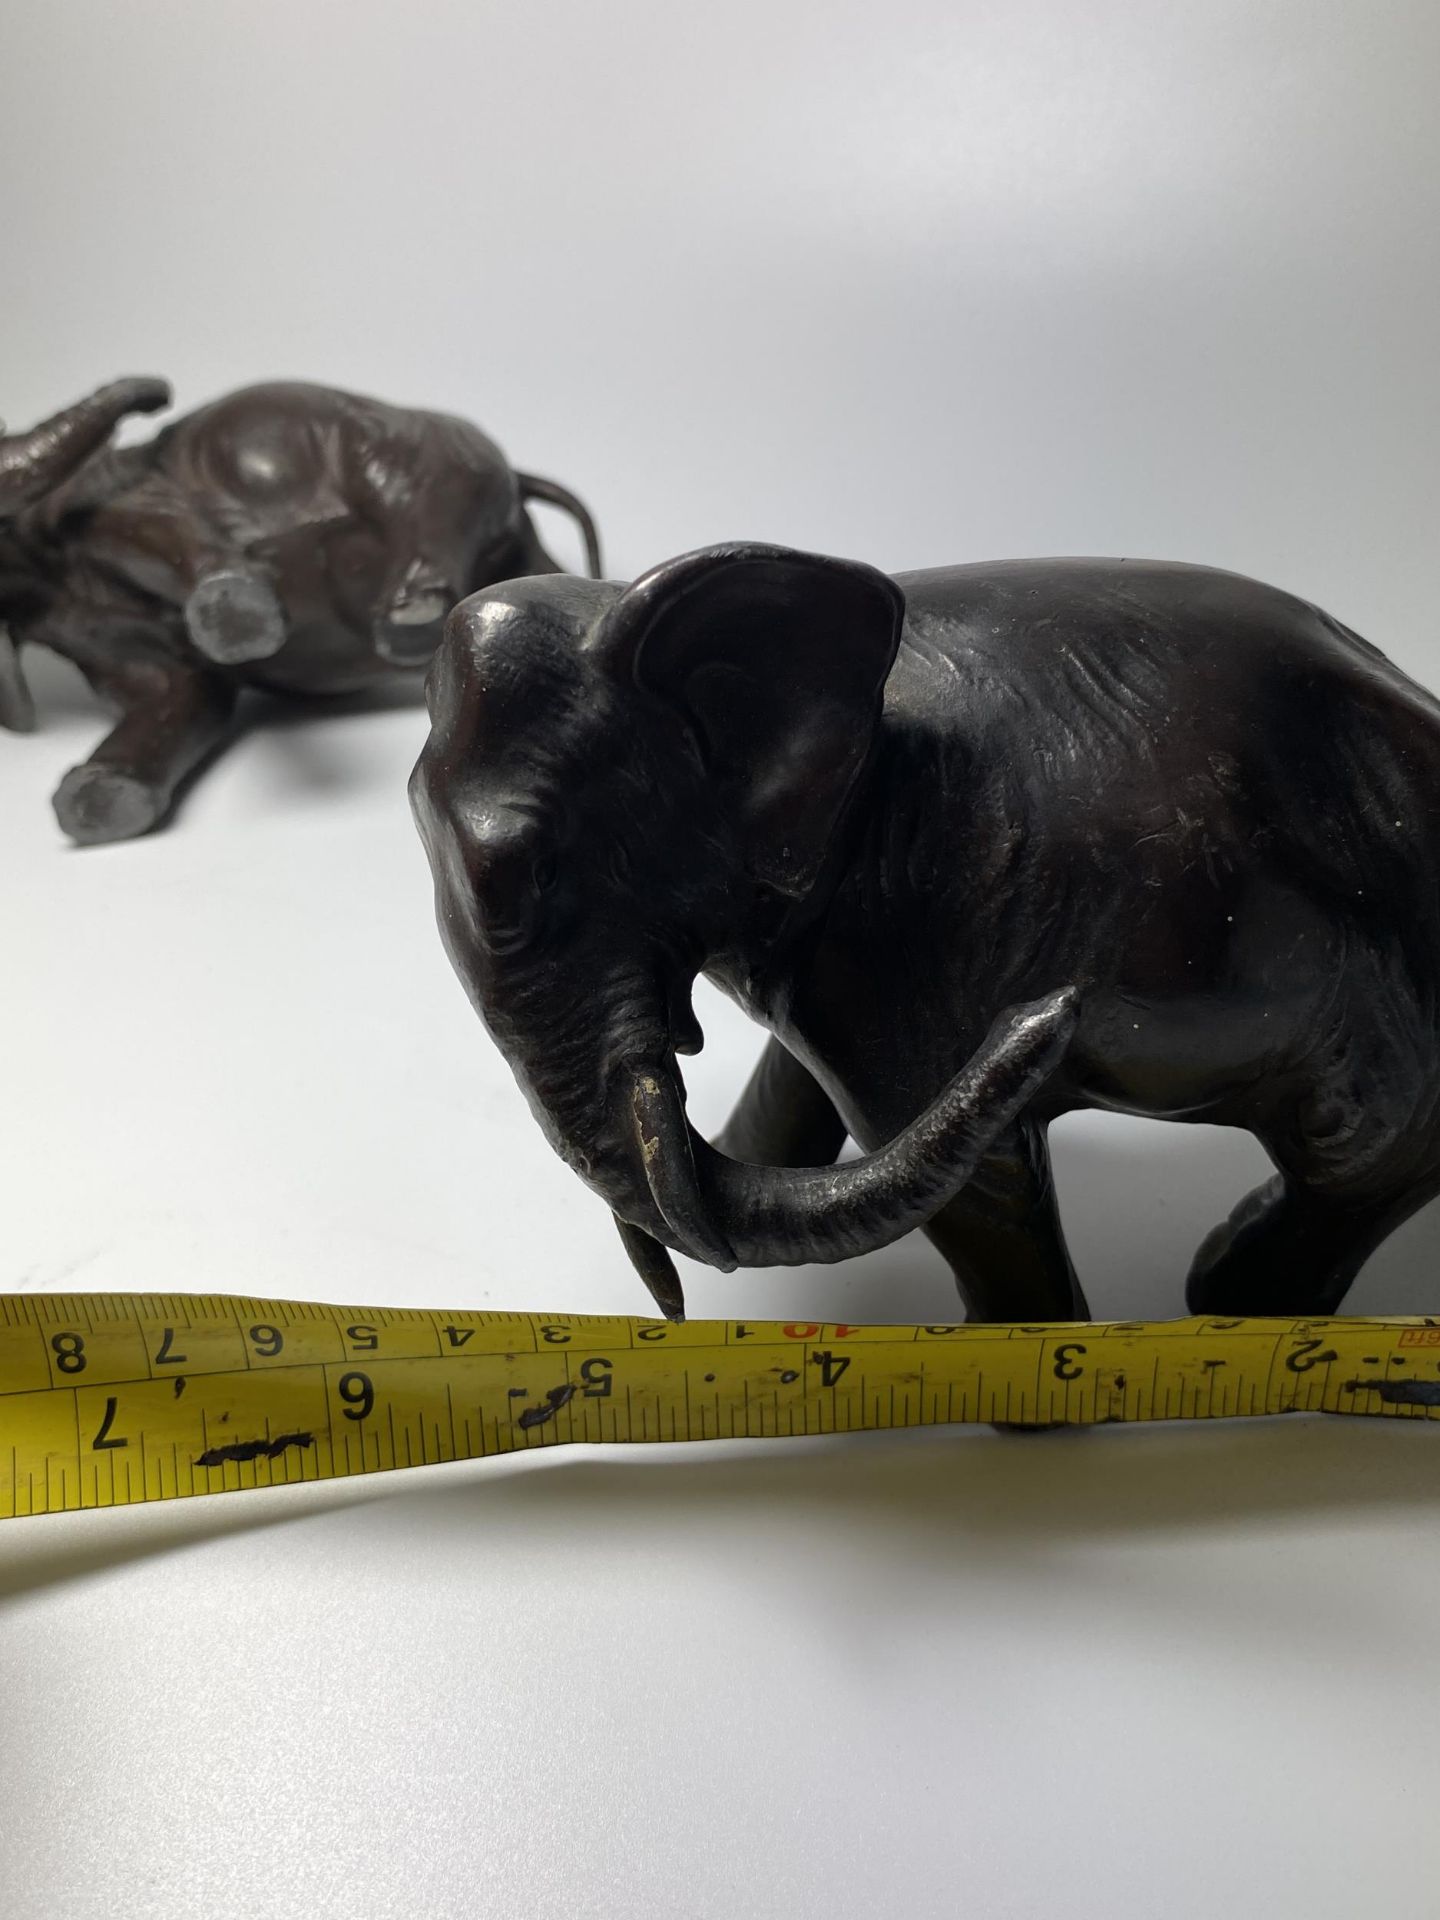 A PAIR OF EARLY 20TH CENTURY JAPANESE METAL MODELS OF ELEPHANTS, 10 X 14CM - Image 7 of 7